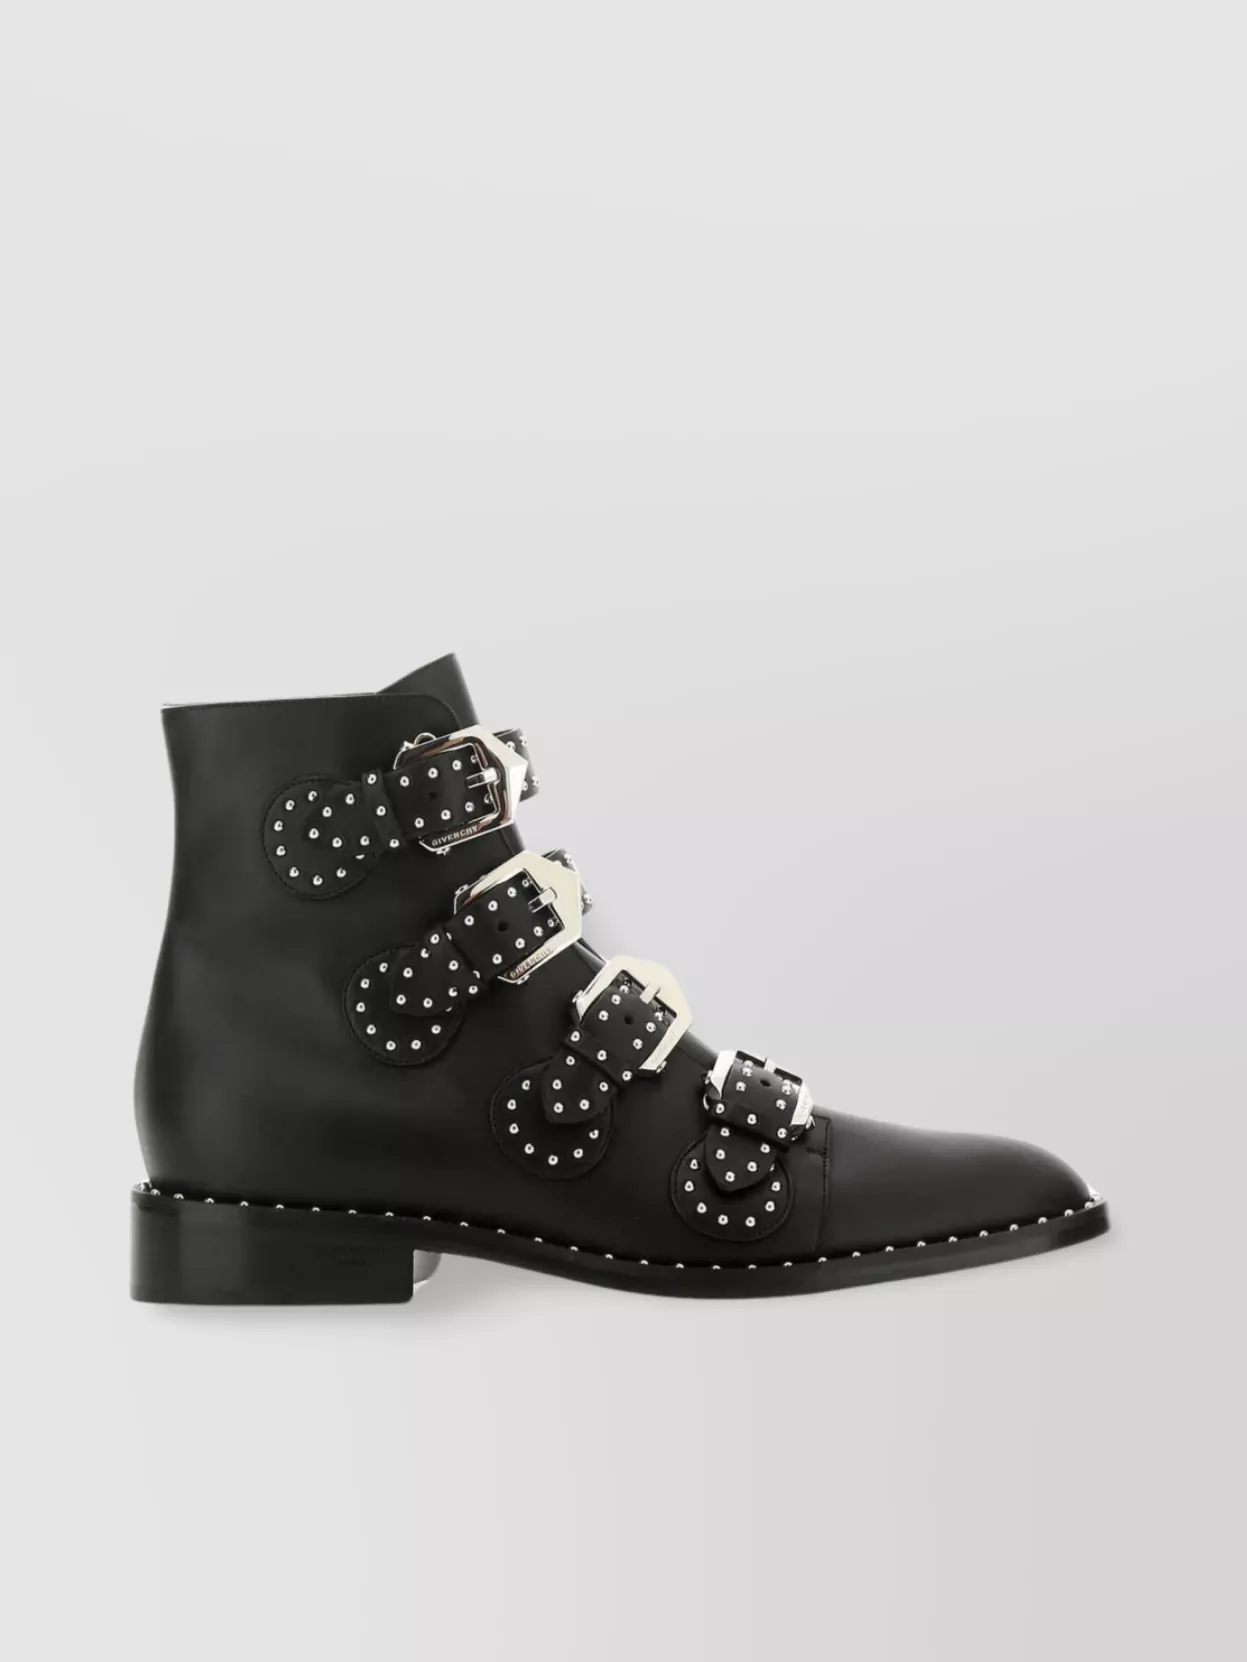 Shop Givenchy Ankle Leather Boots Studs Pointed